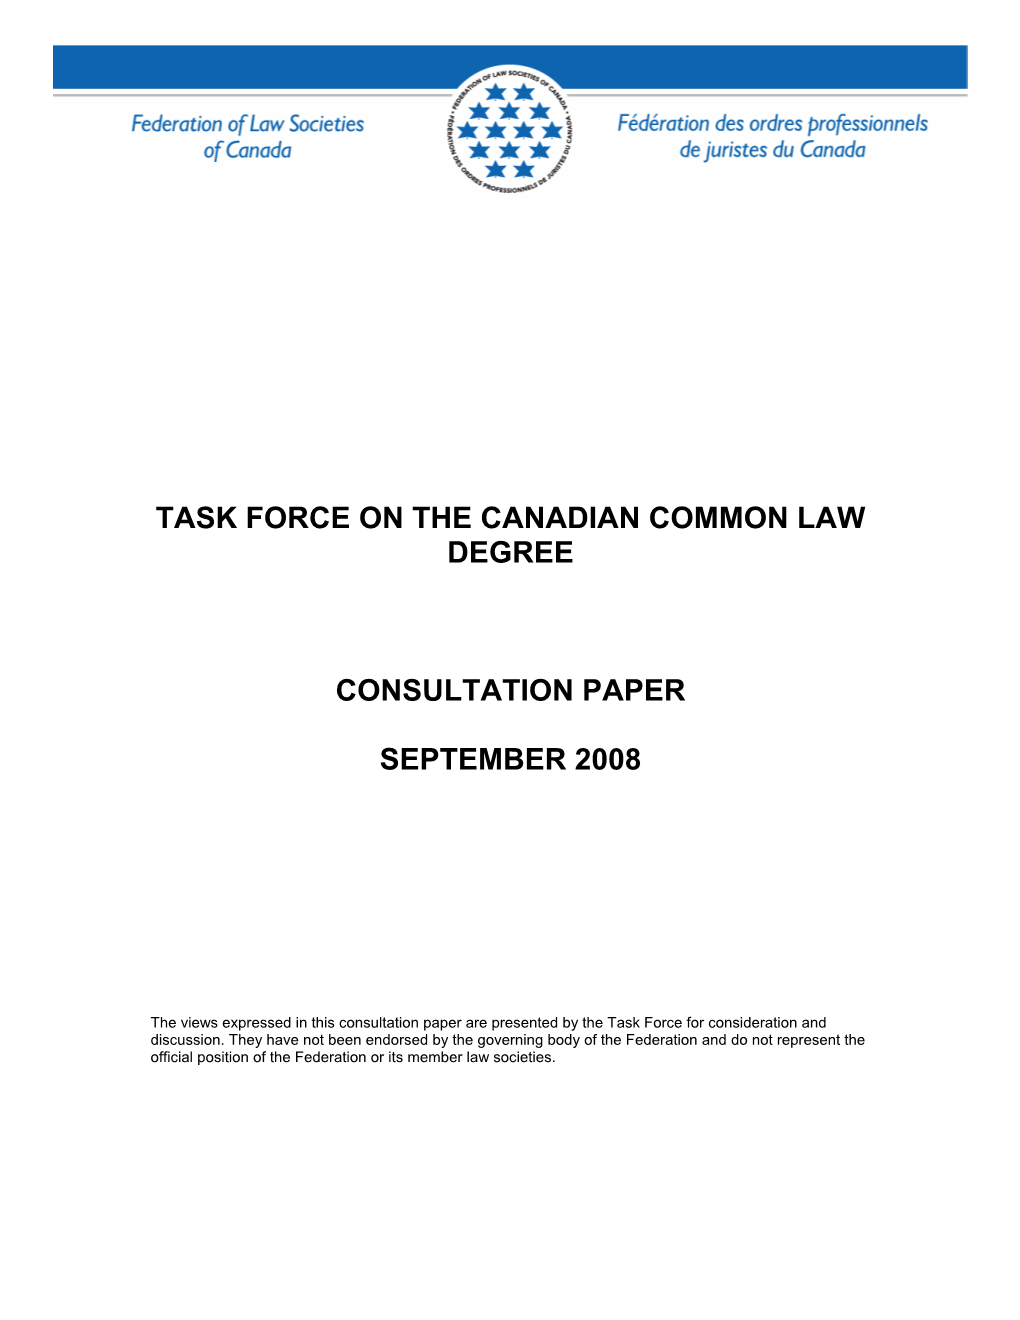 Consultation Paper: Task Force on the Canadian Common Law Degree